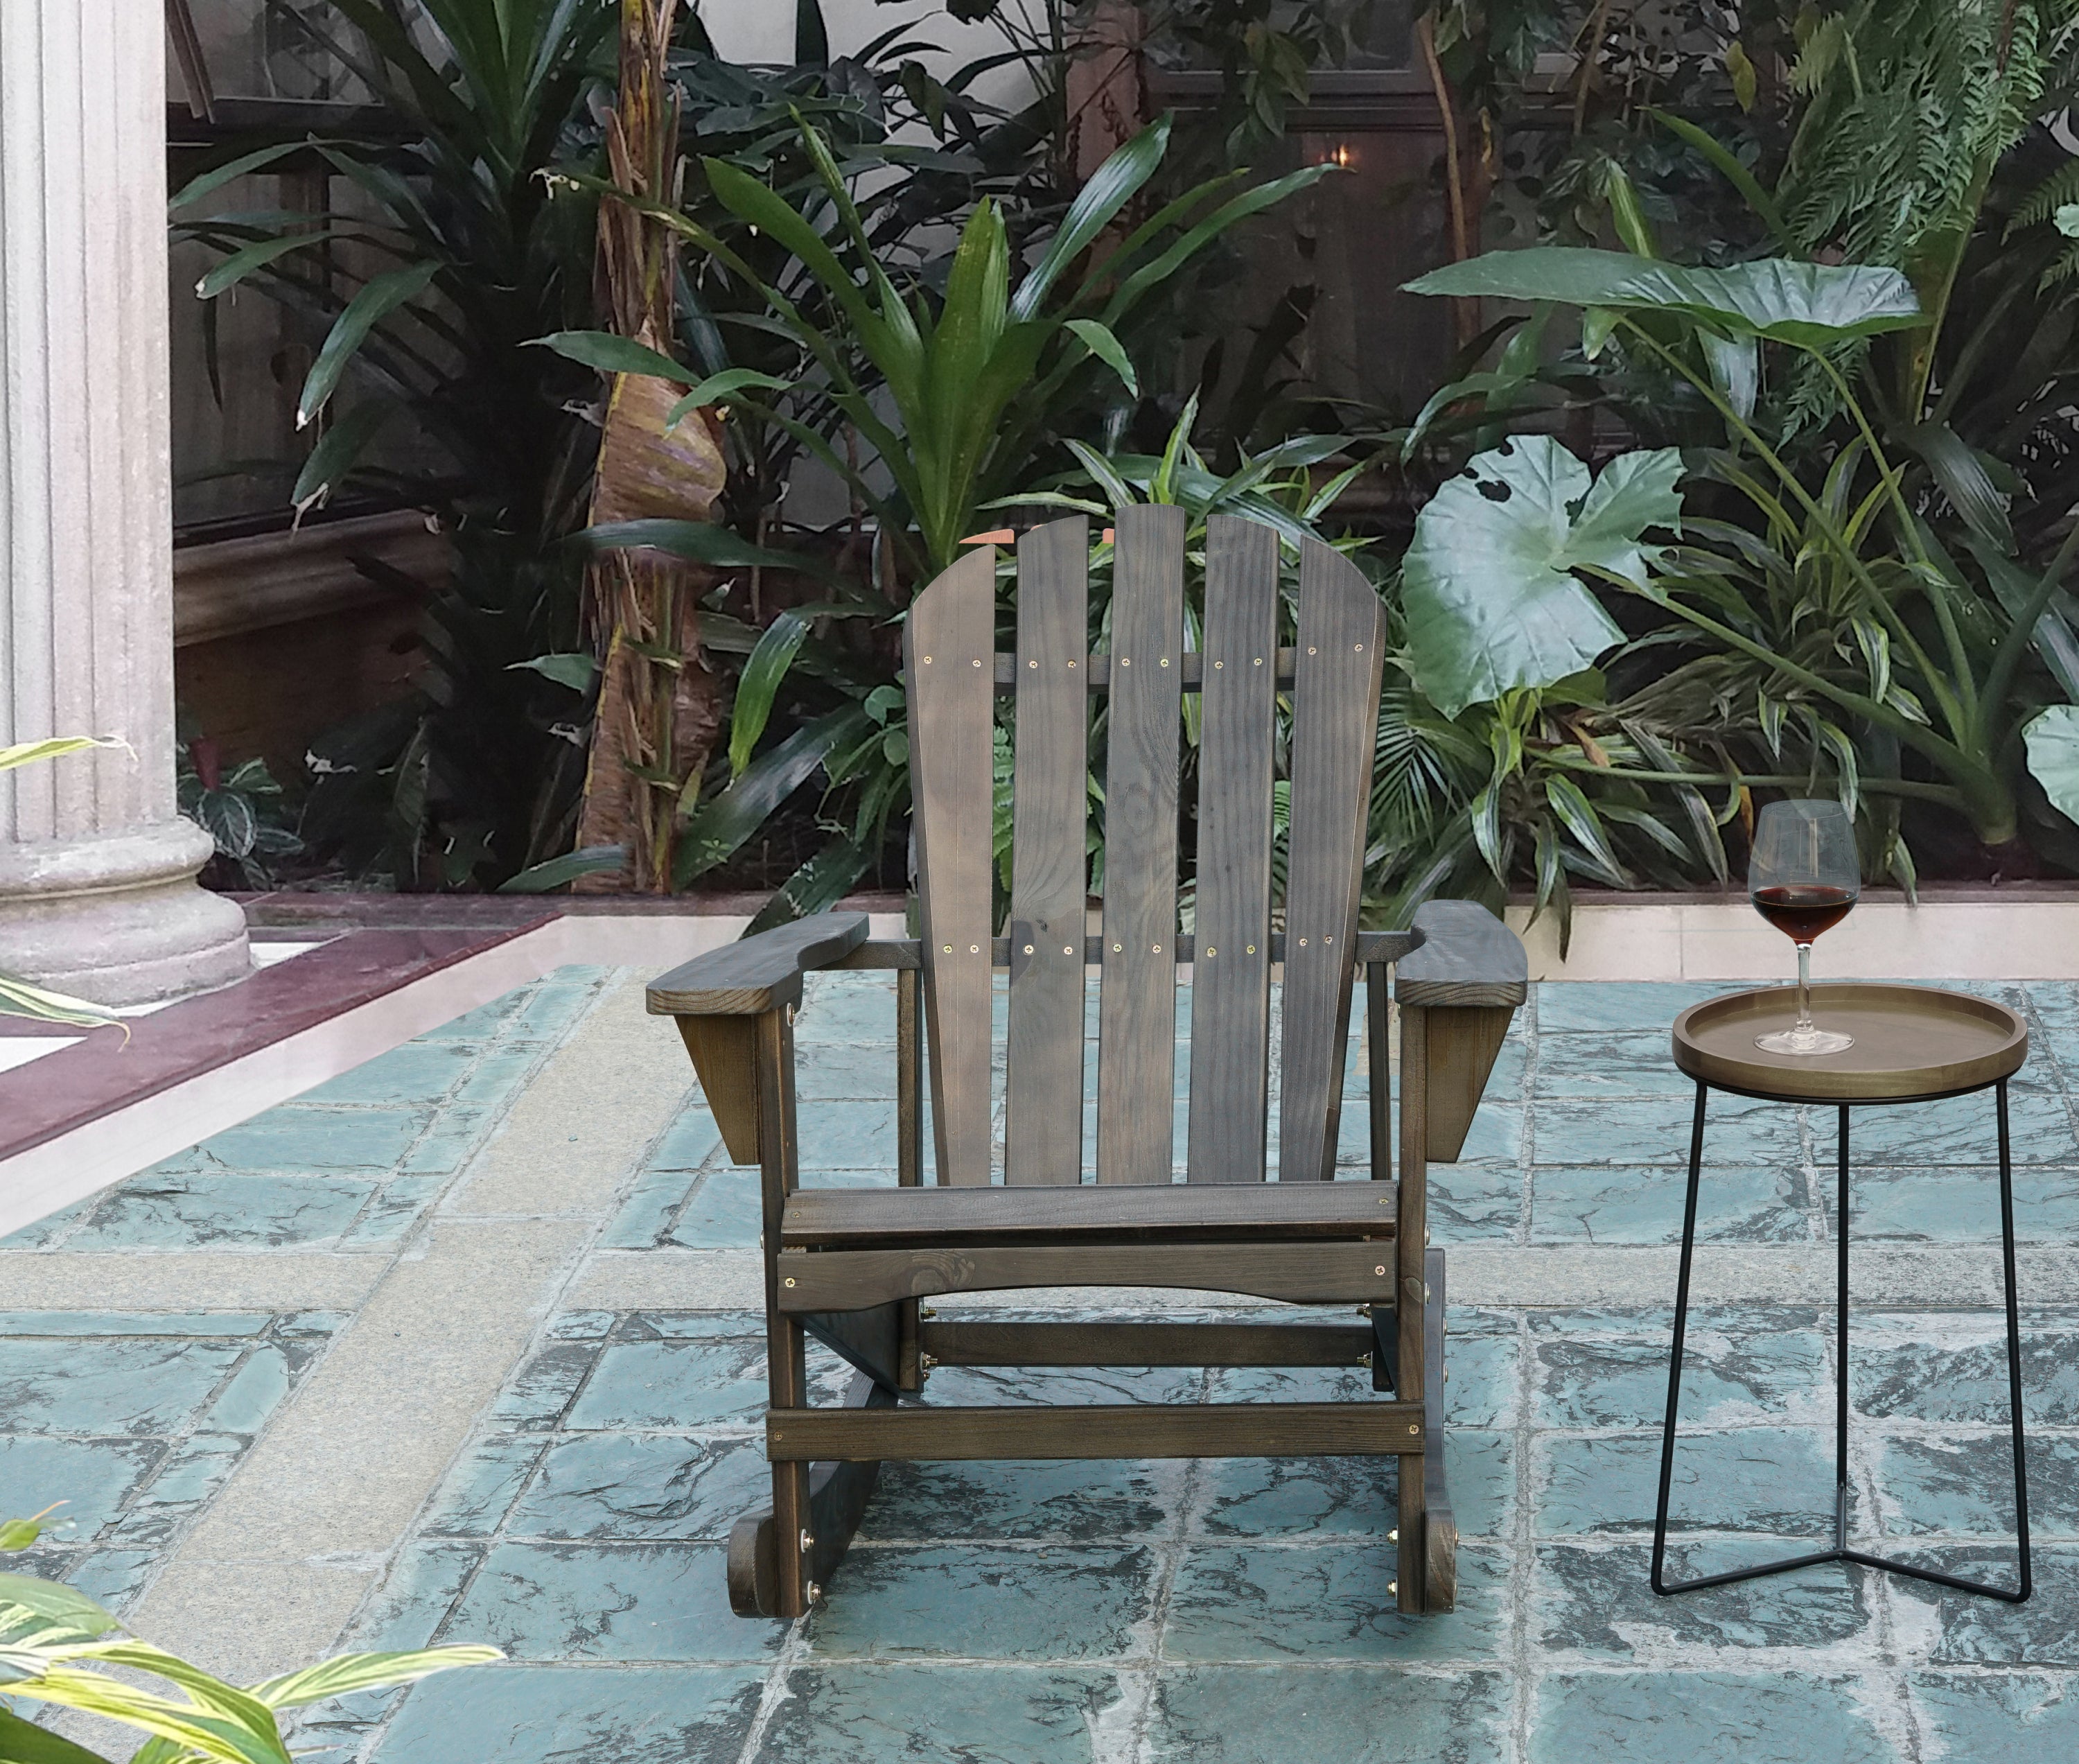 Adirondack-Rocking-Chair-Solid-Wood-Chairs-Finish-Outdoor-Furniture-for-Patio,-Backyard,-Garden--Dark-Brown-Outdoor-Chairs